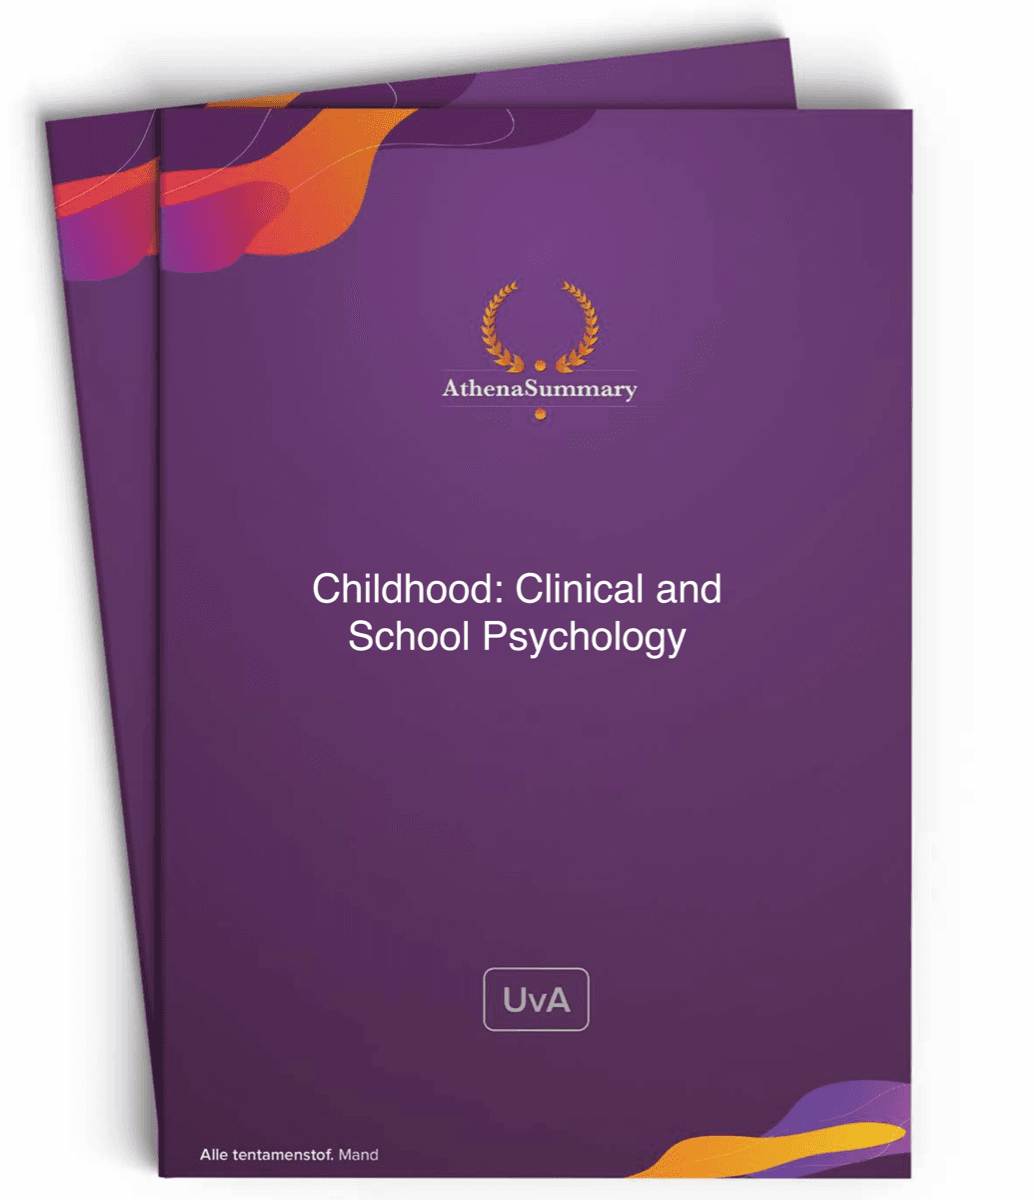 Literature Summary: Childhood: Clinical and School Psychology